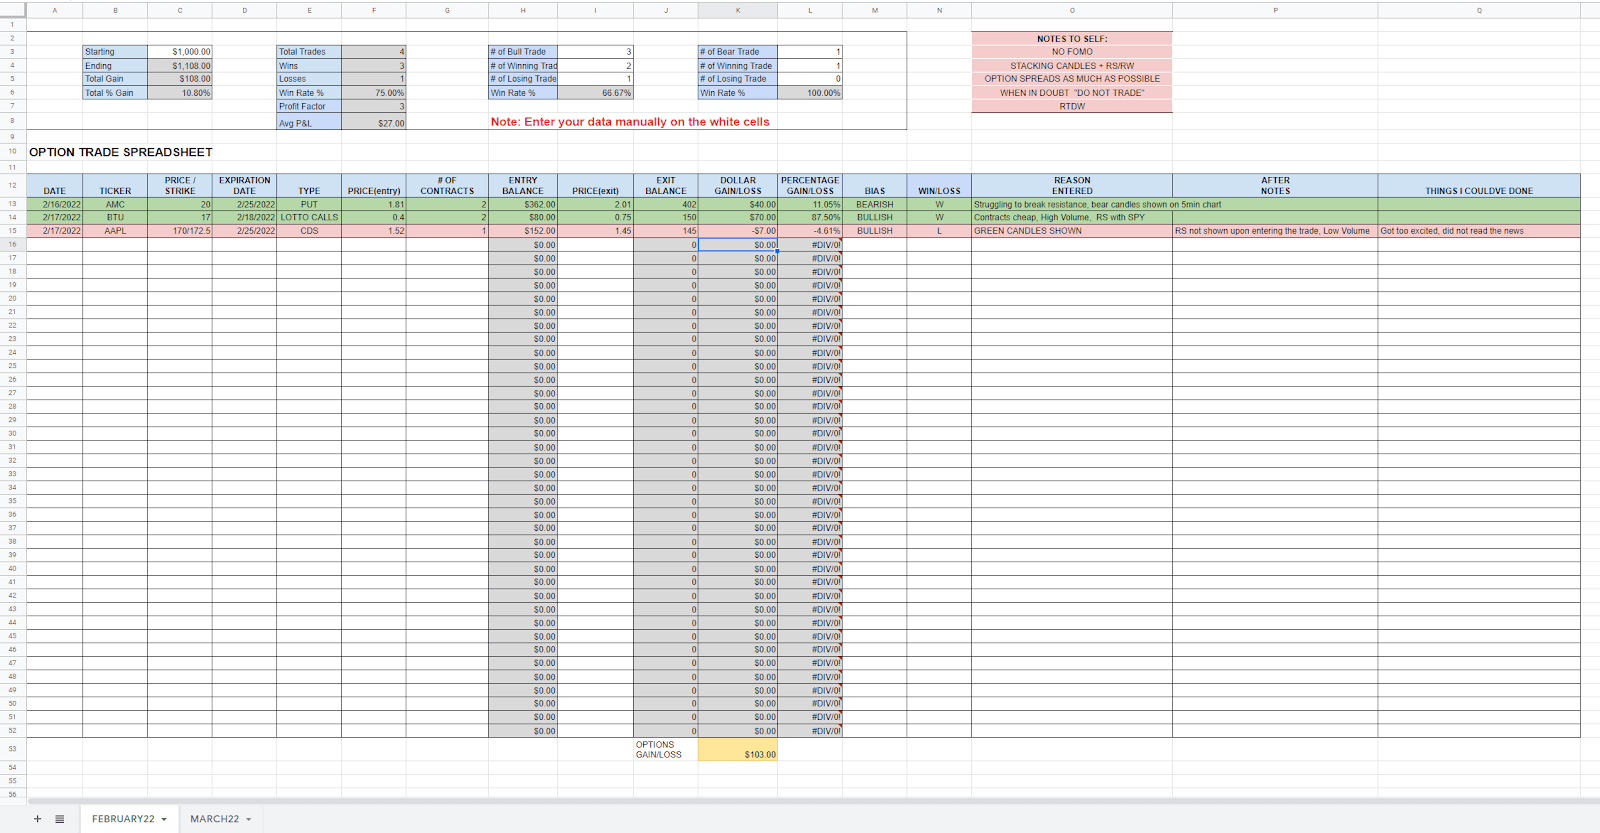 An example of a spreadsheet designed to organize one's trading records and facilitate post-trade analysis.